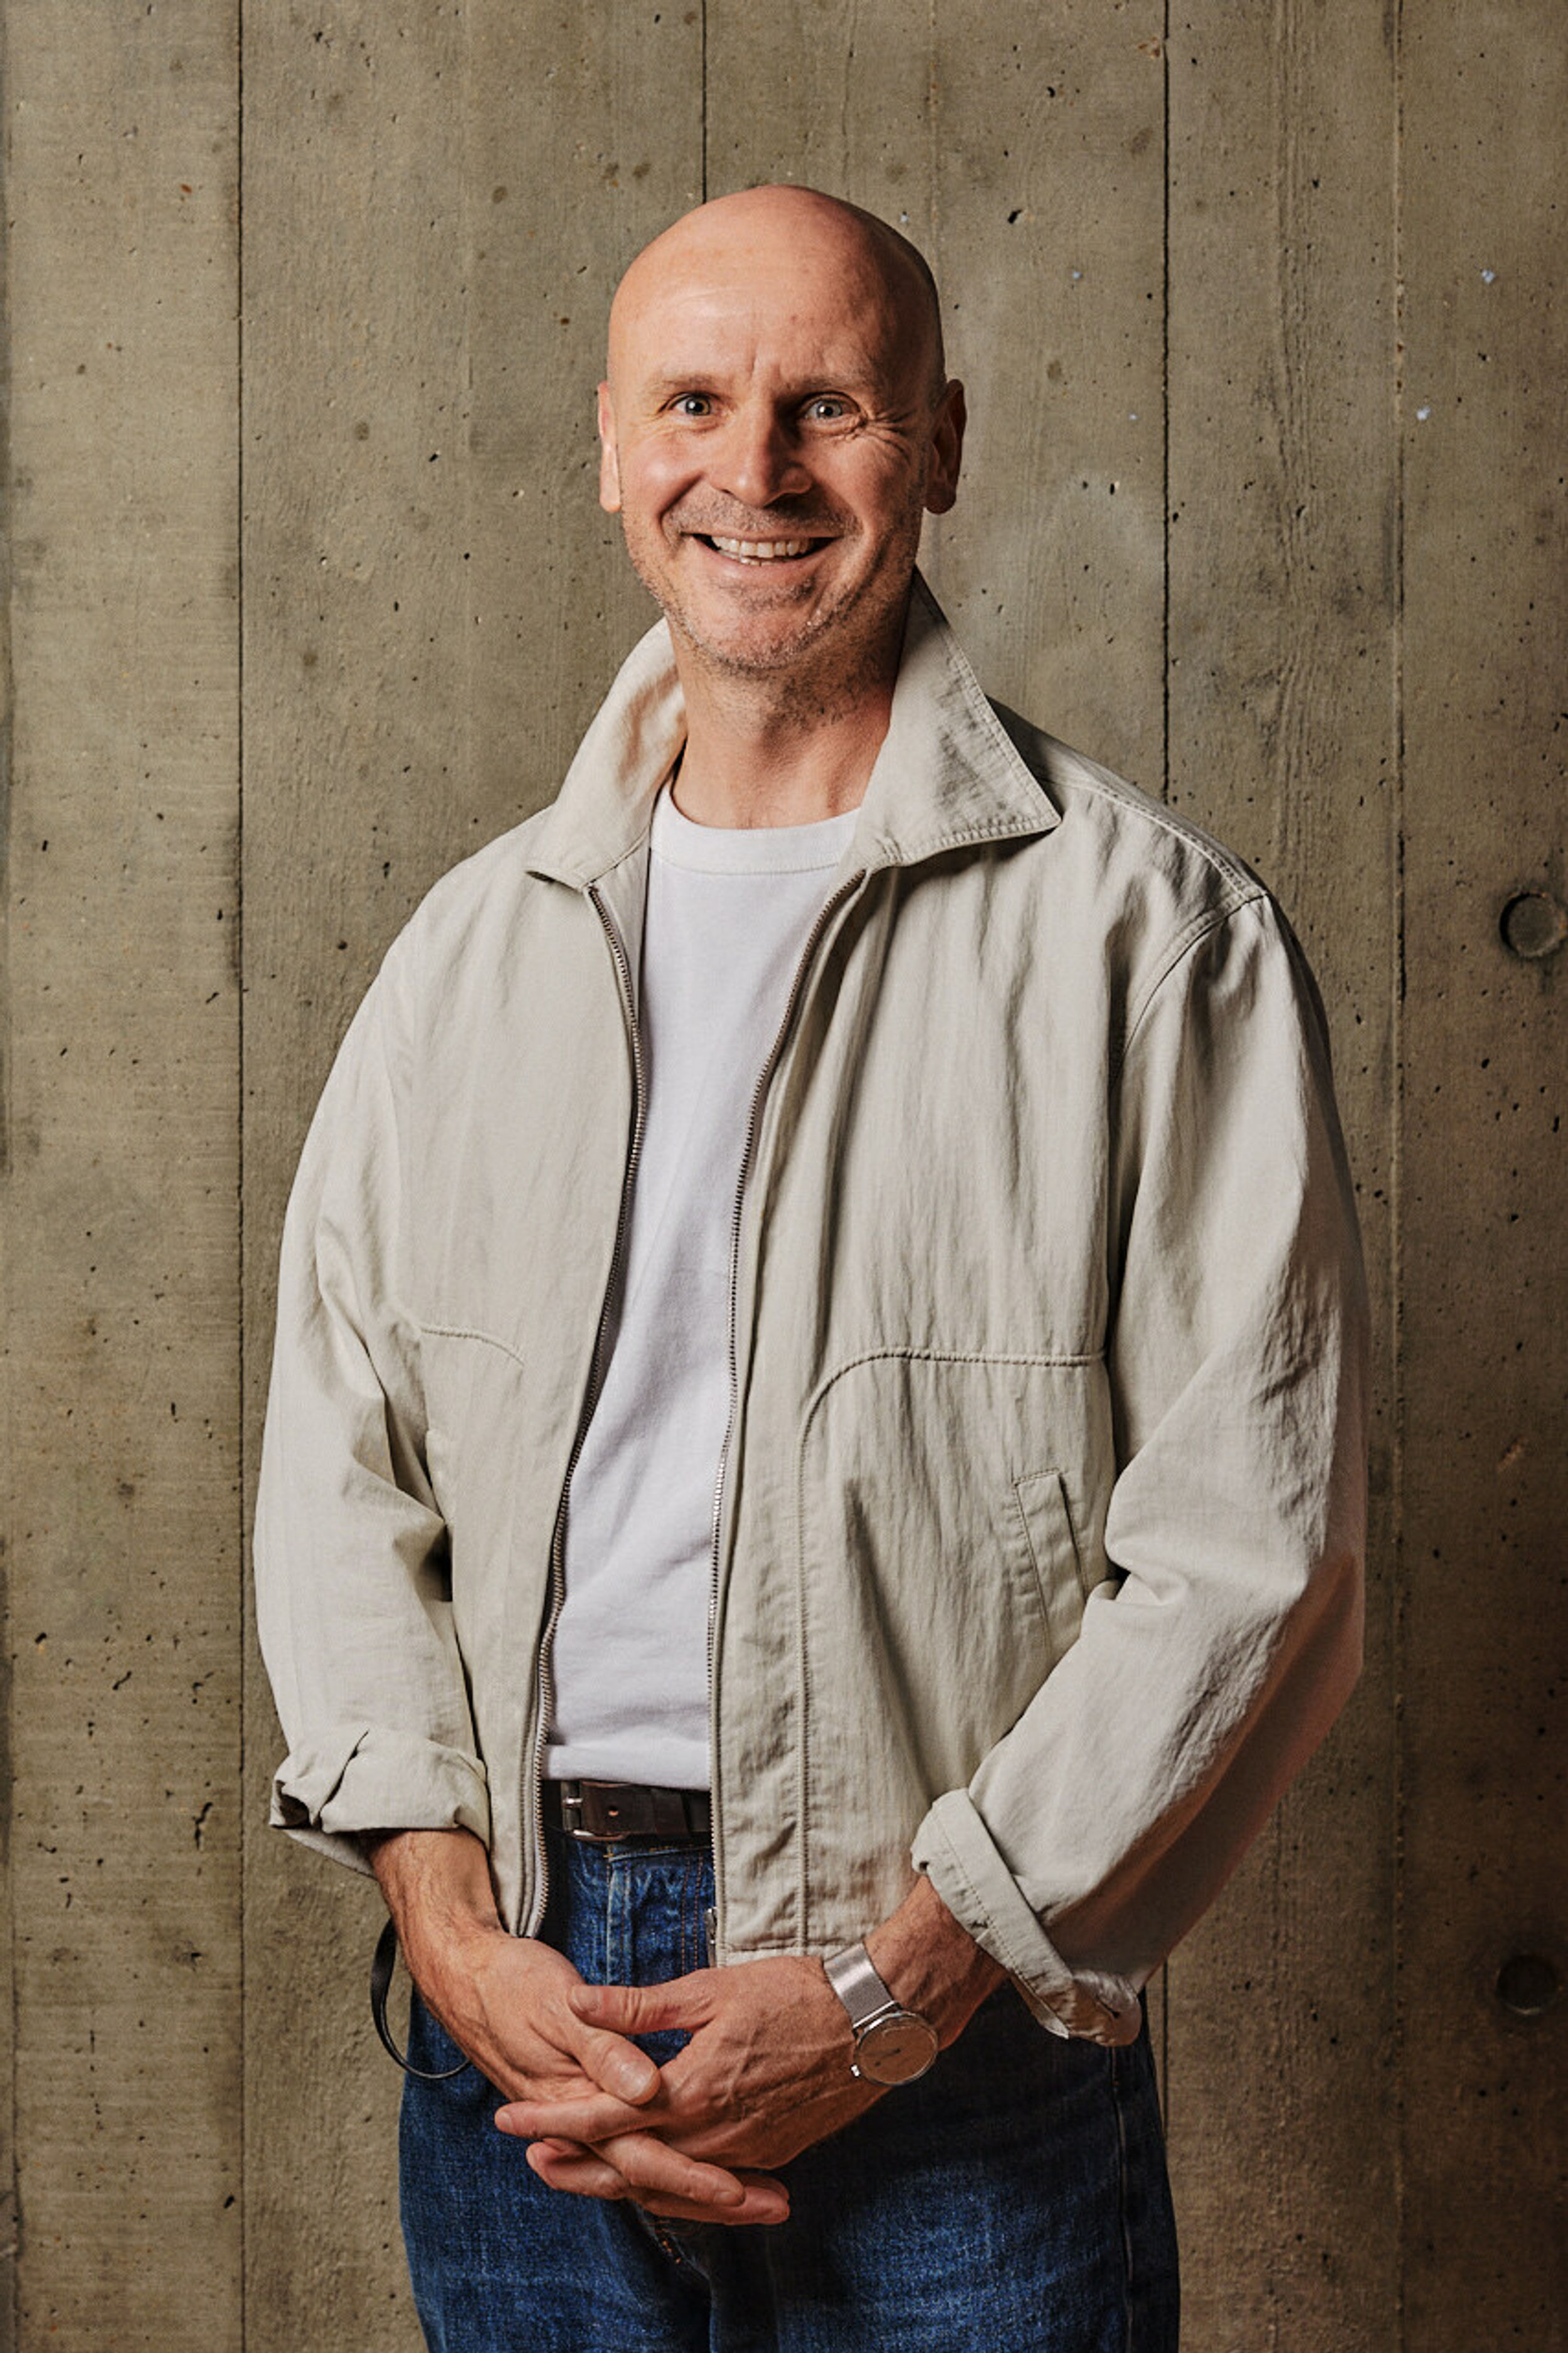 A profile shot of a smiling man, wearing a beige open shirt and white t-shirt, in front of a board marked concrete backdrop.